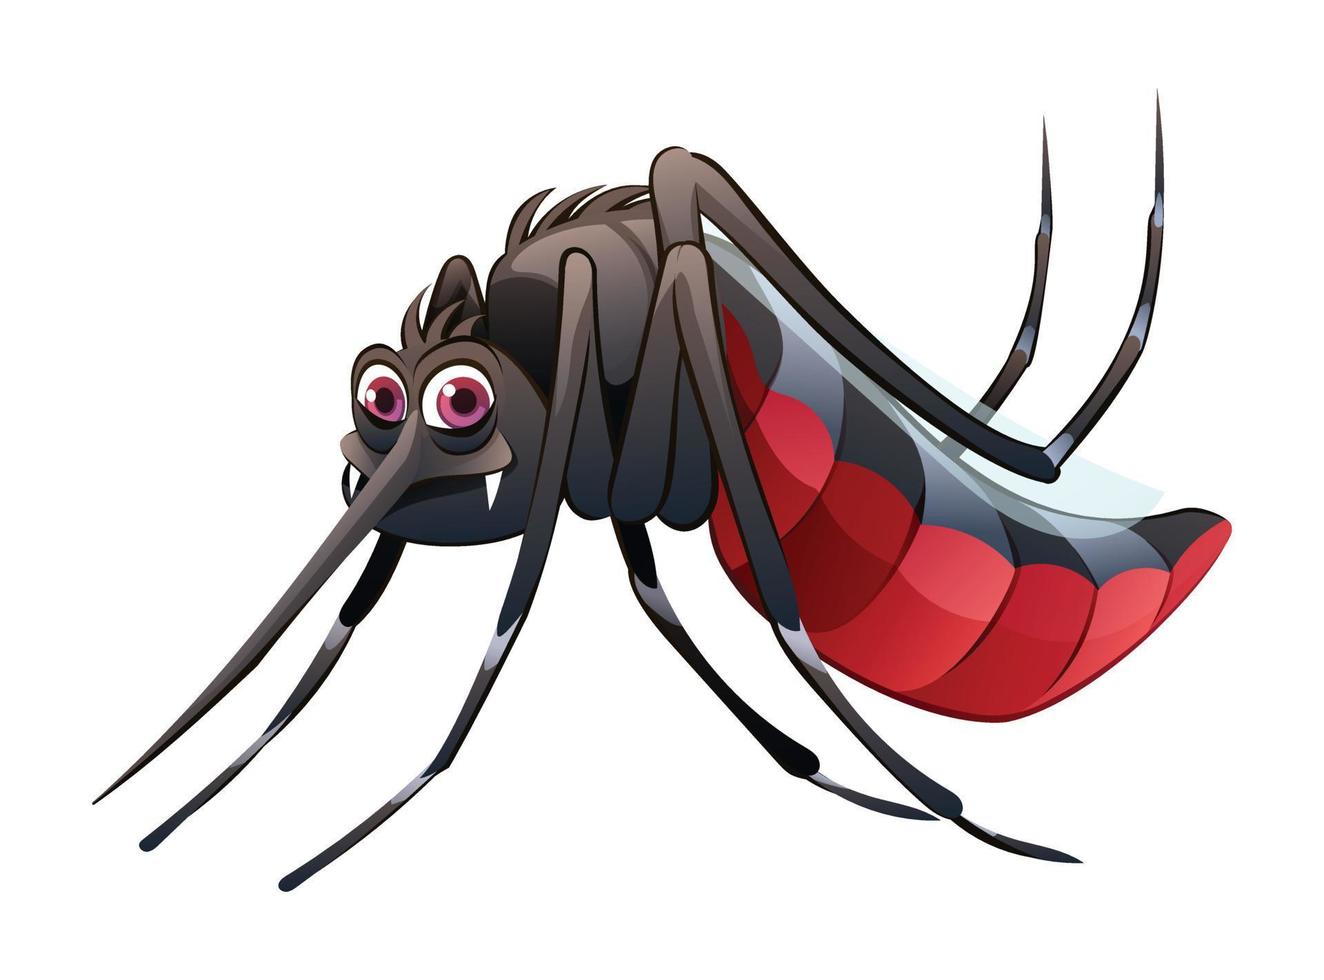 Mosquito cartoon illustration isolated on white background vector